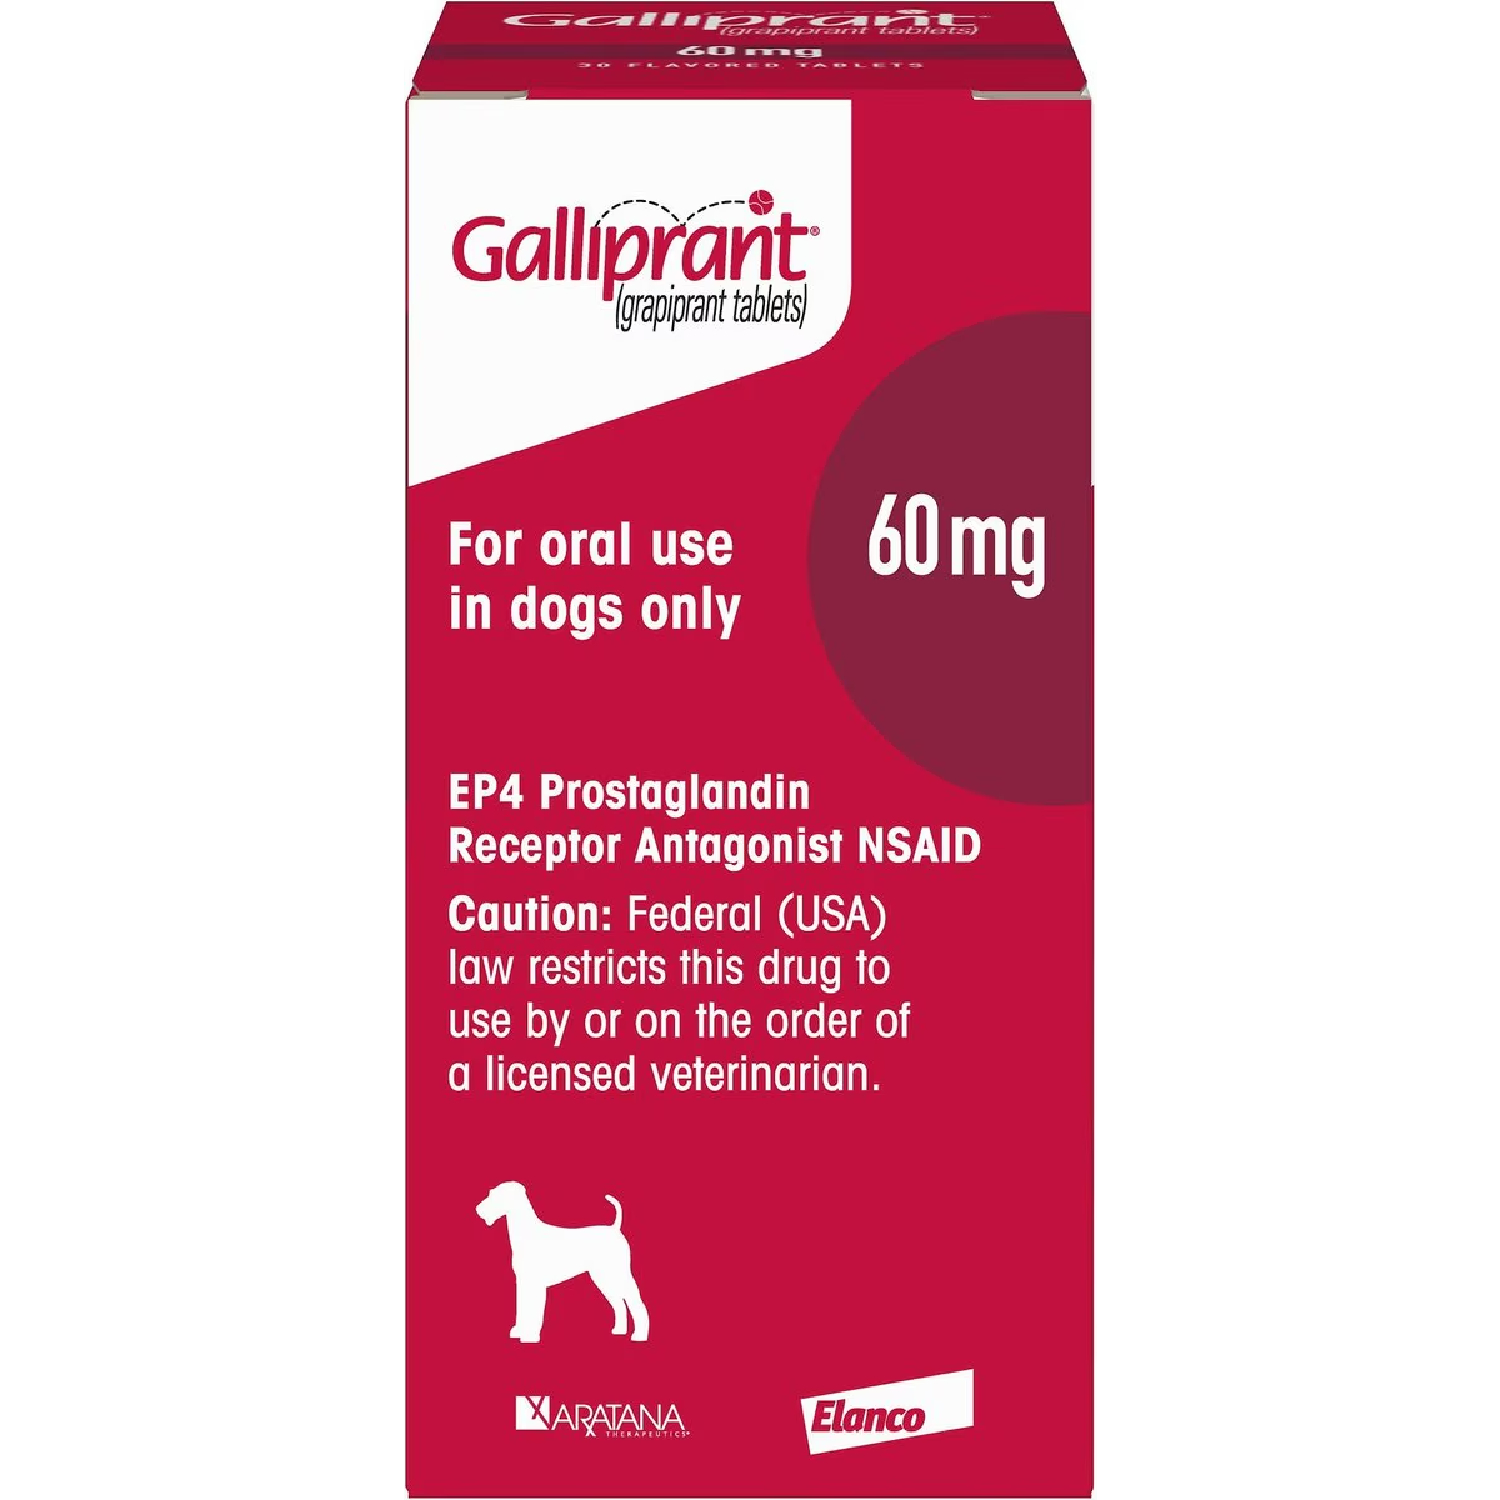 Galliprant (grapiprant) Tablets for Dogs